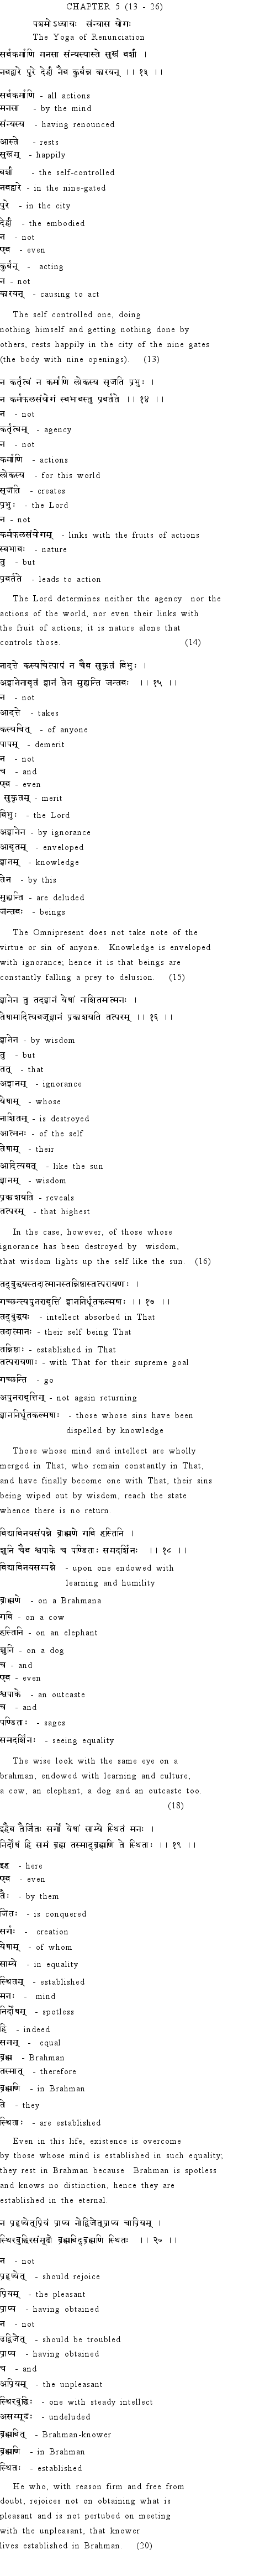 Text of Ch.5_3